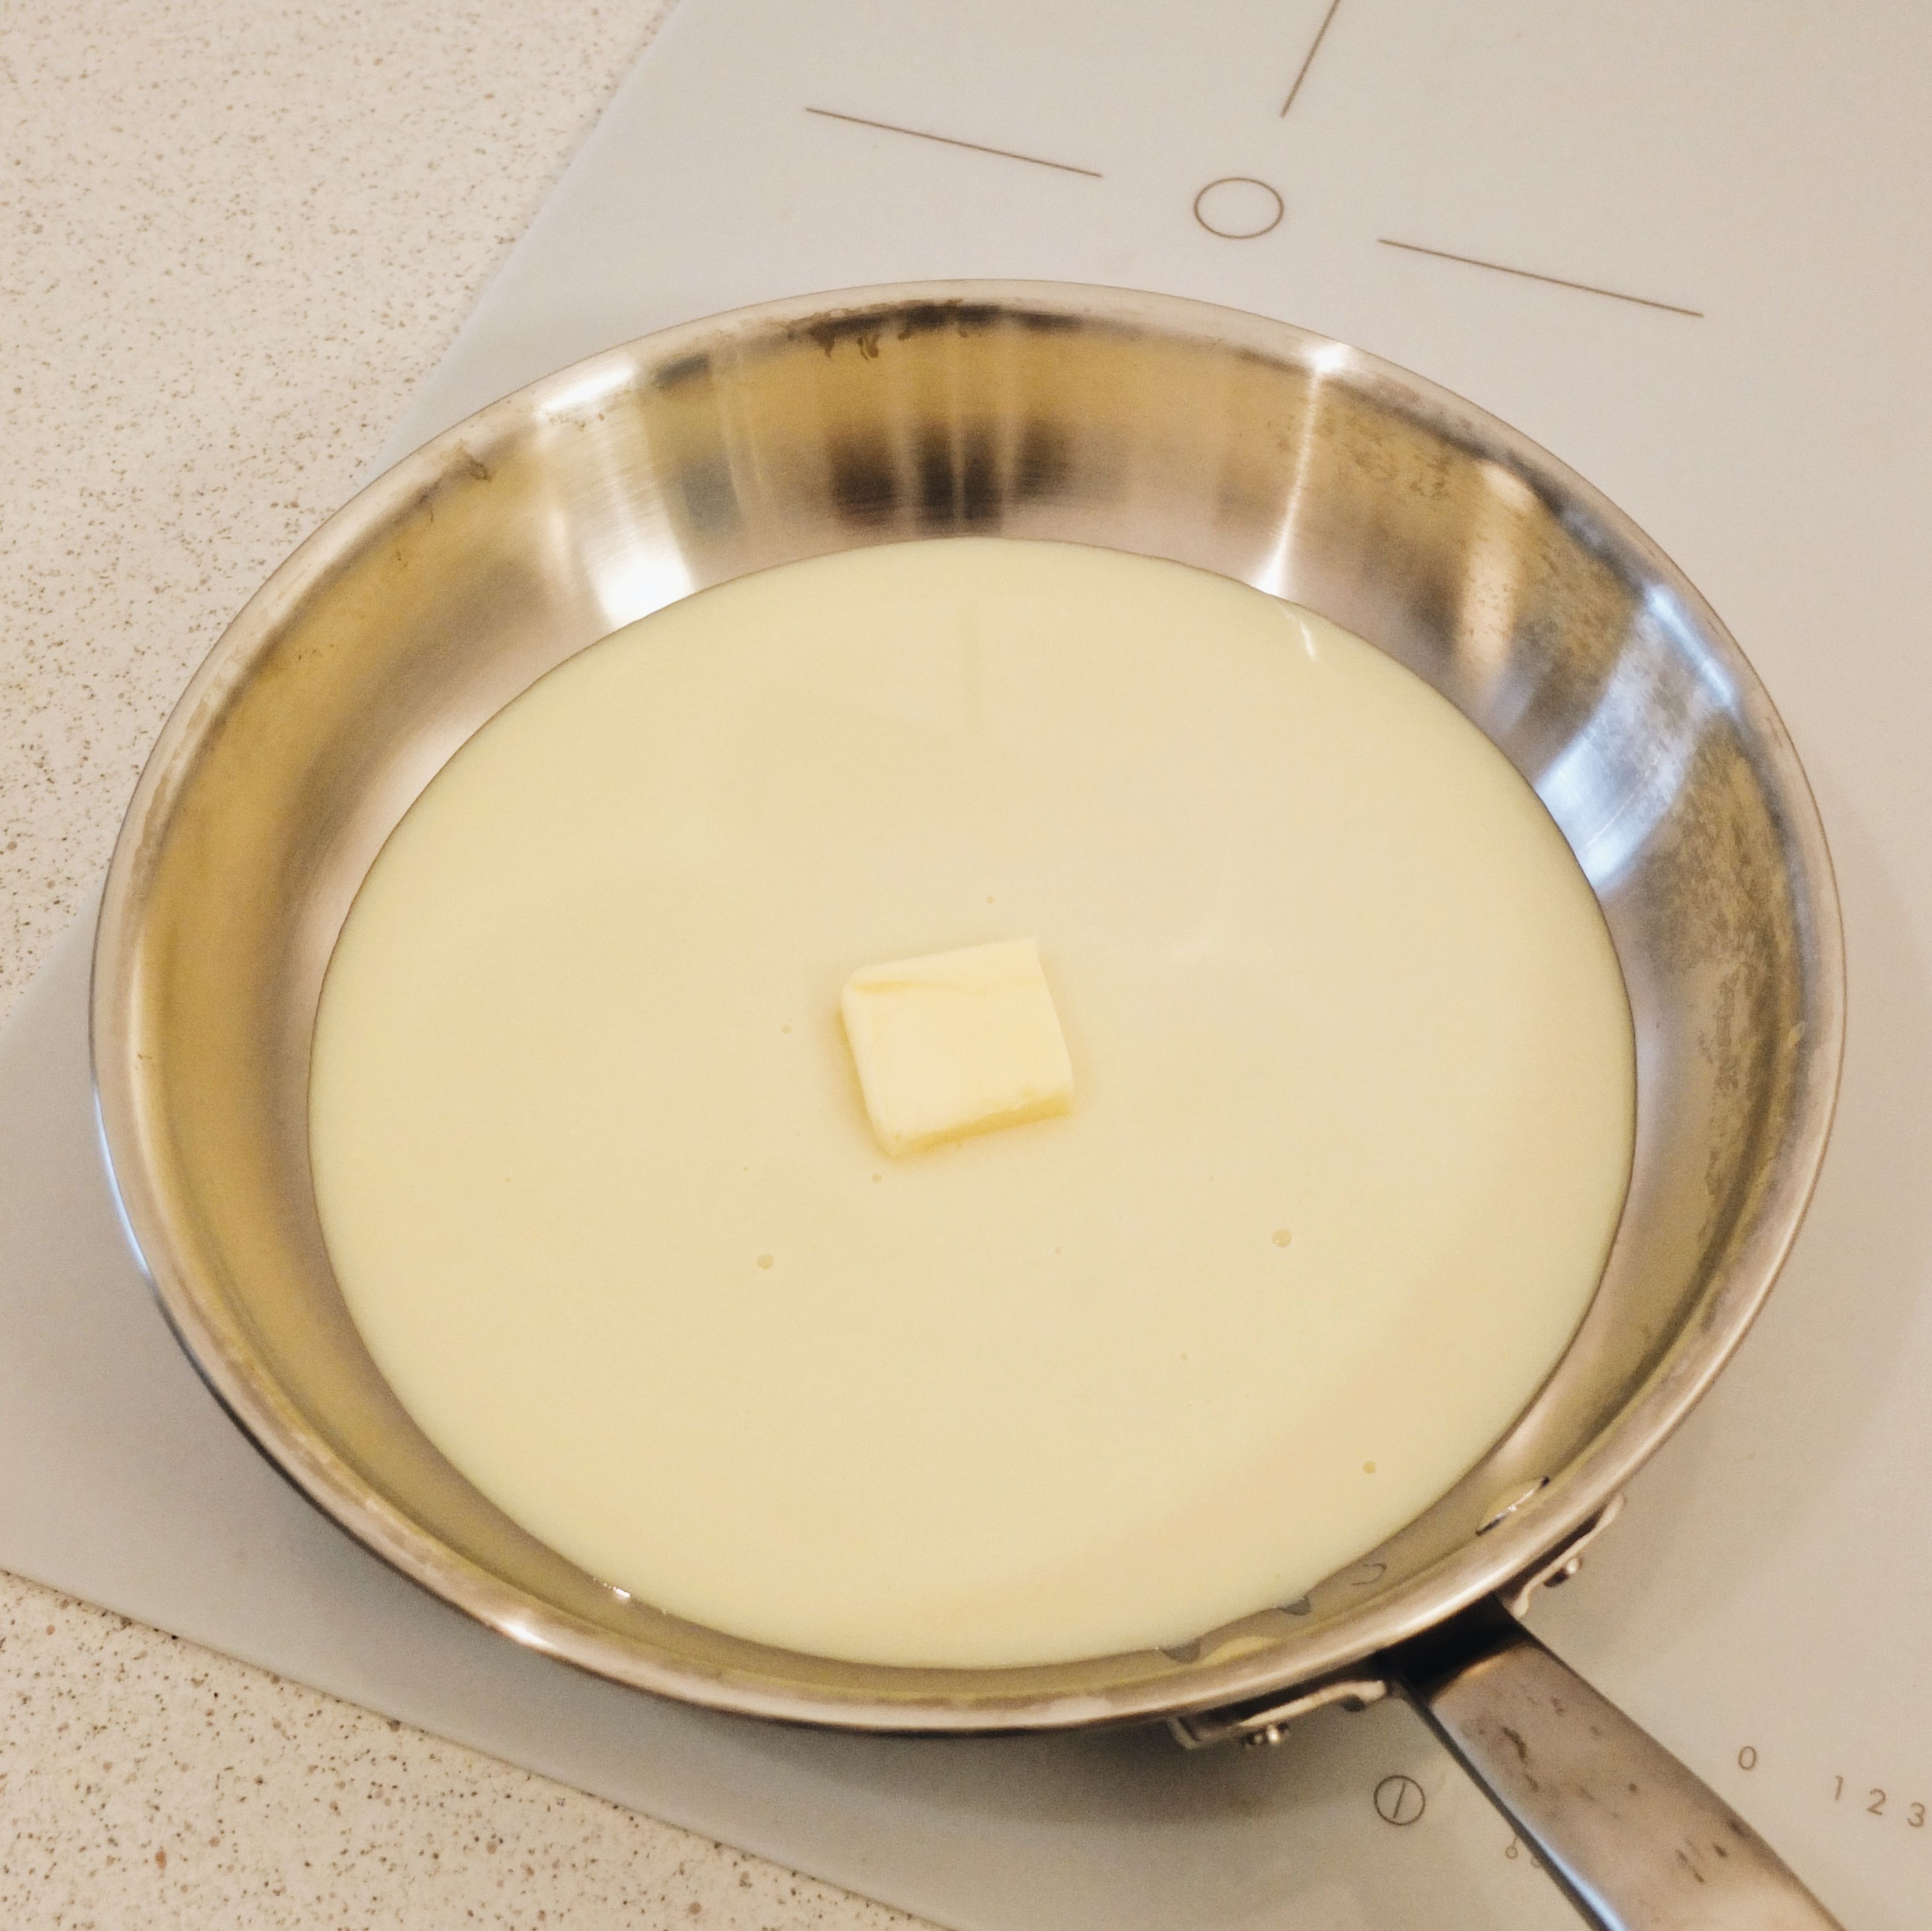 Mix the condensed milk and butter together in a pan and cook it over low-medium heat, stirring constantly until it has thickened and the mixture is sticking slightly to the bottom of the pan.